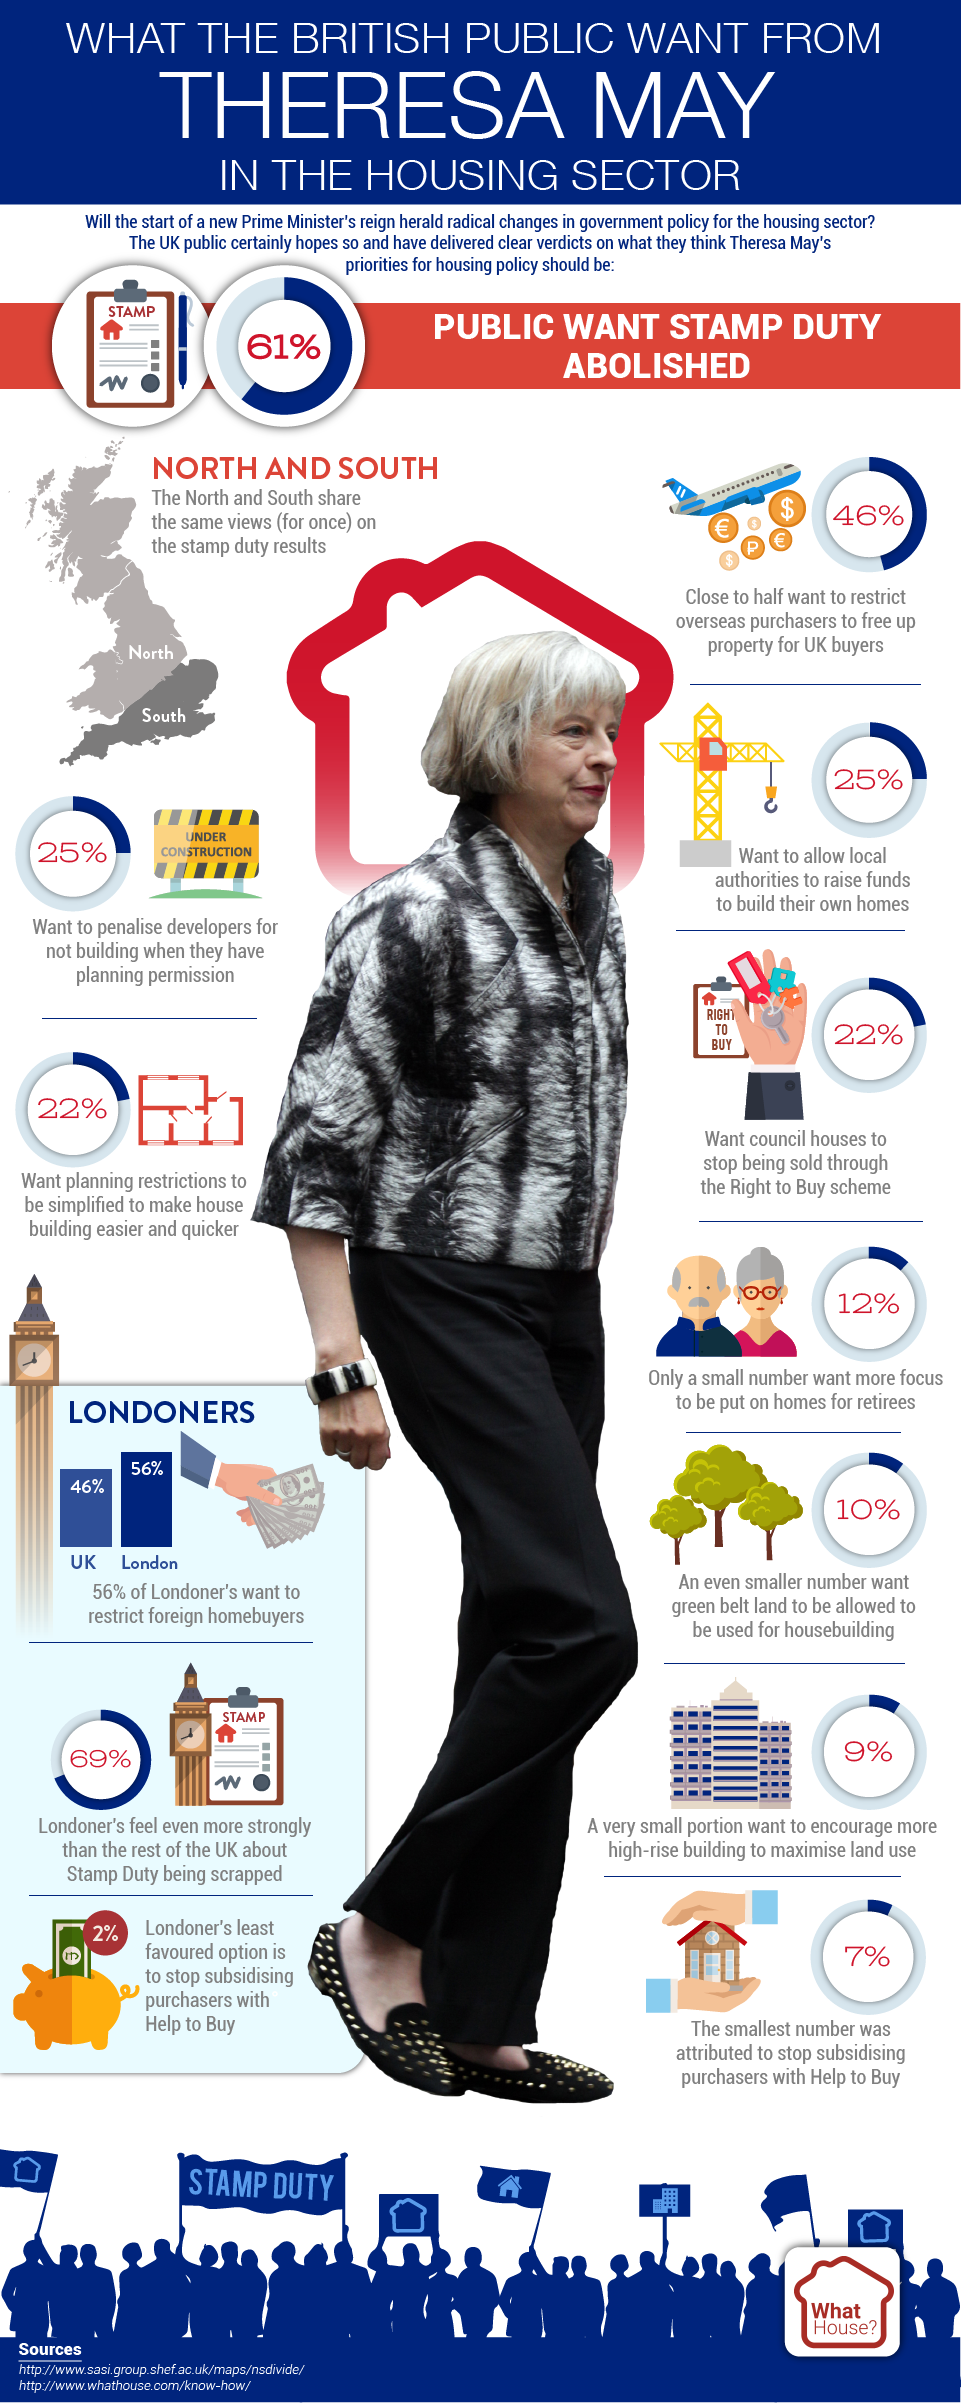 What The British Public Want From Theresa May In The Housing Sector?